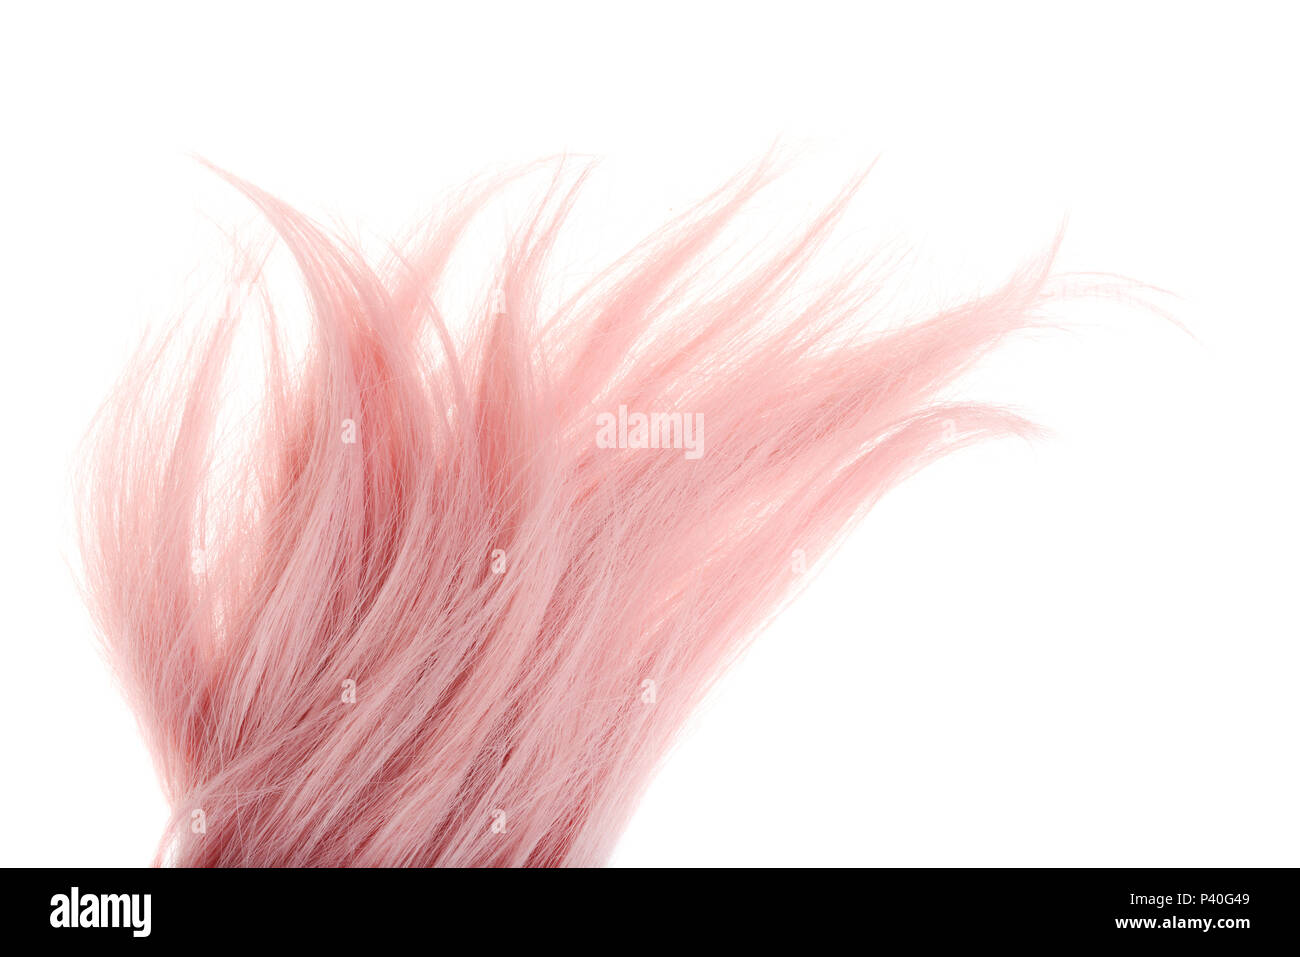 piece of pink hair isolated Stock Photo